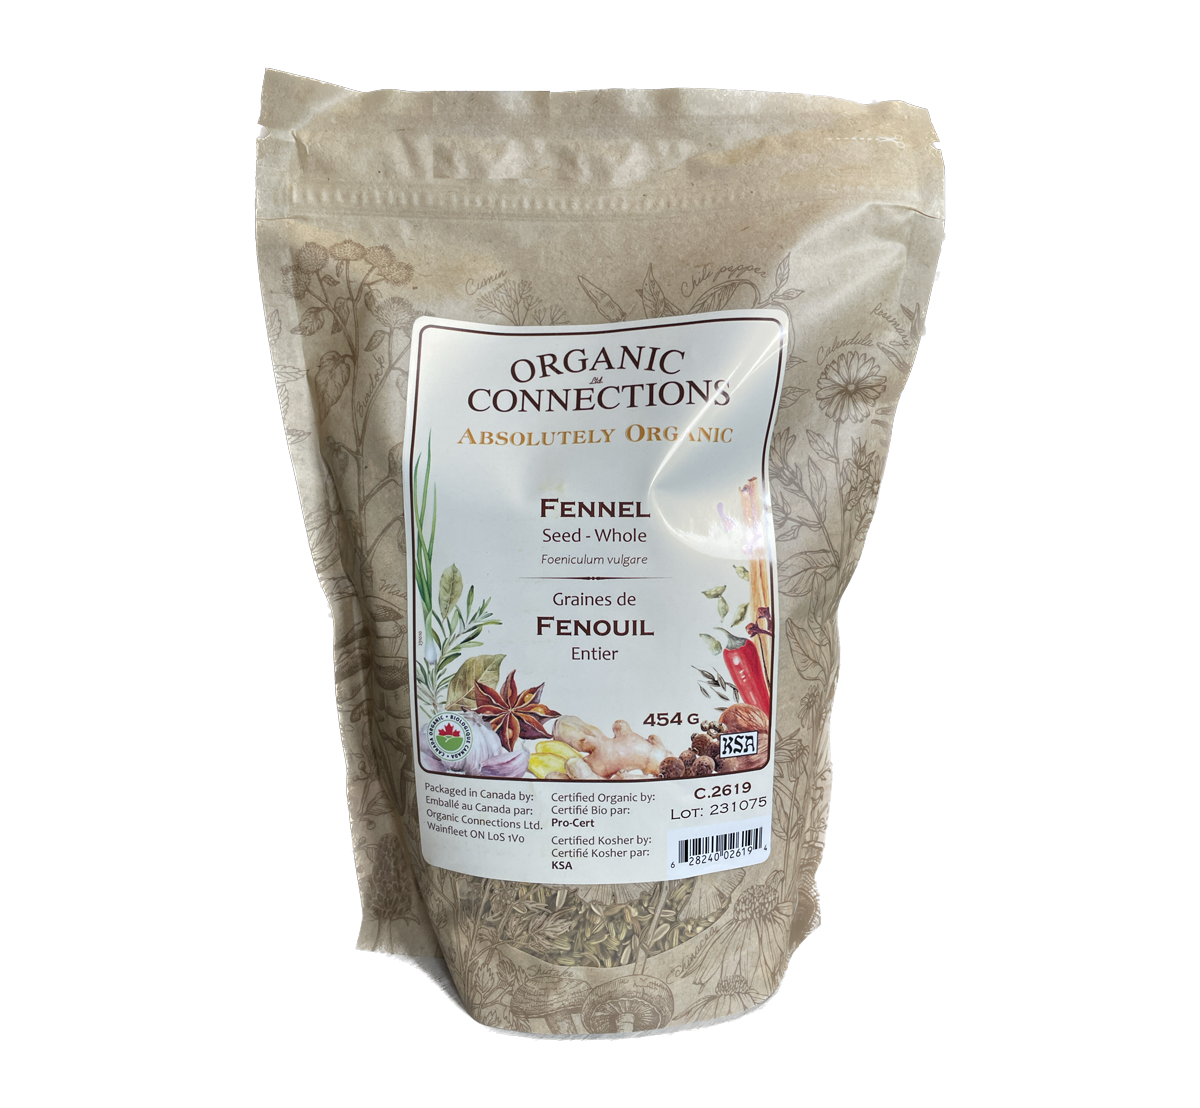 Organic Connections Organic Fennel Seed Whole 454g